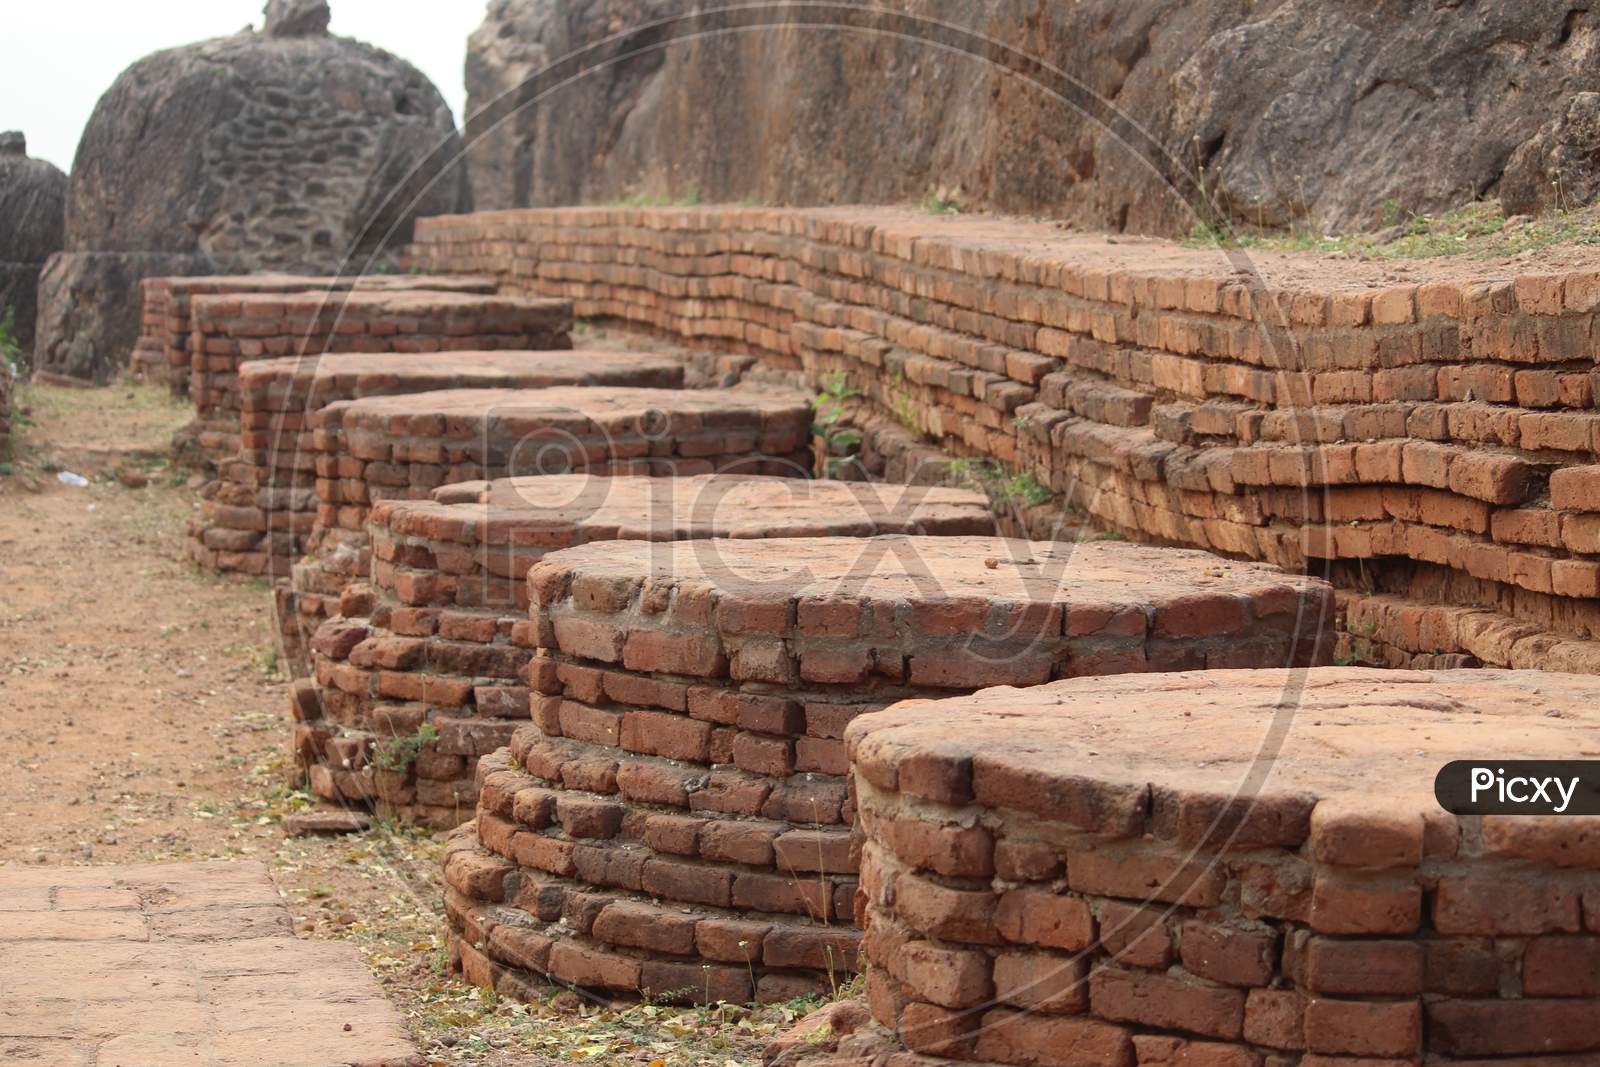 Ruins of Buddhist temple located at Andhra Pradesh